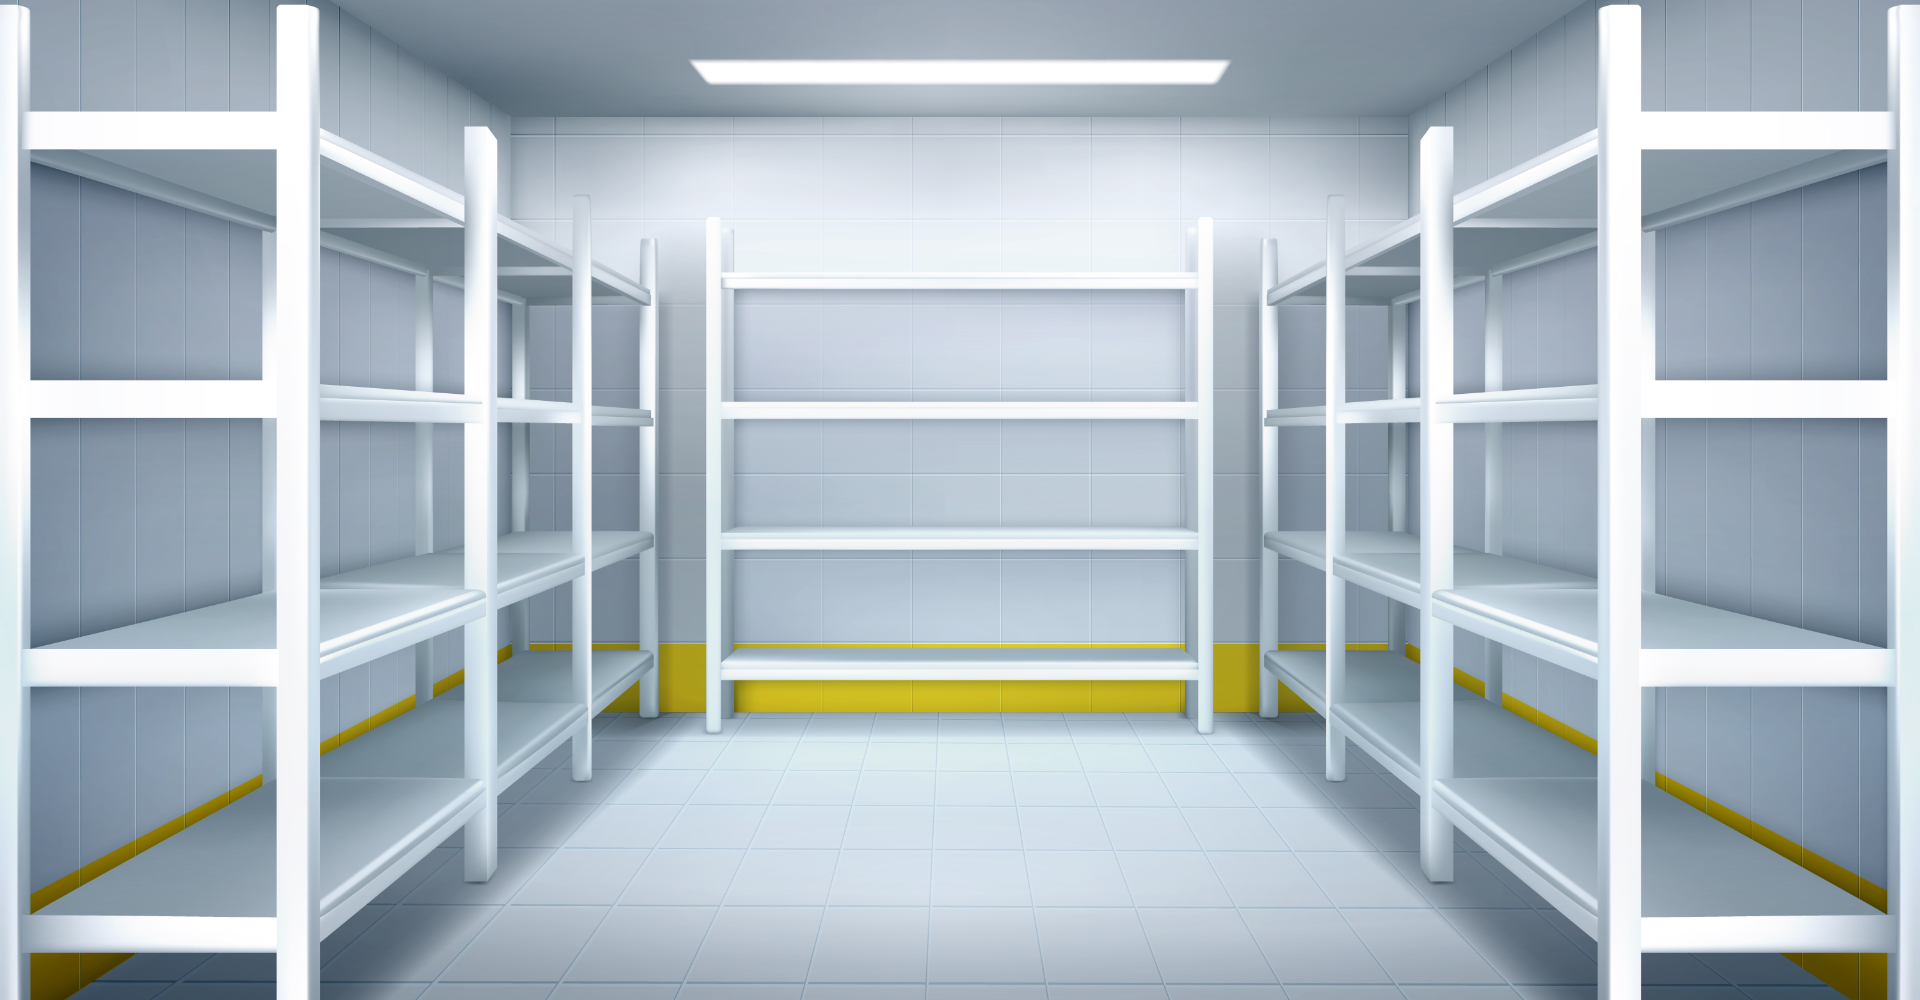 Tips to maximise your self storage space